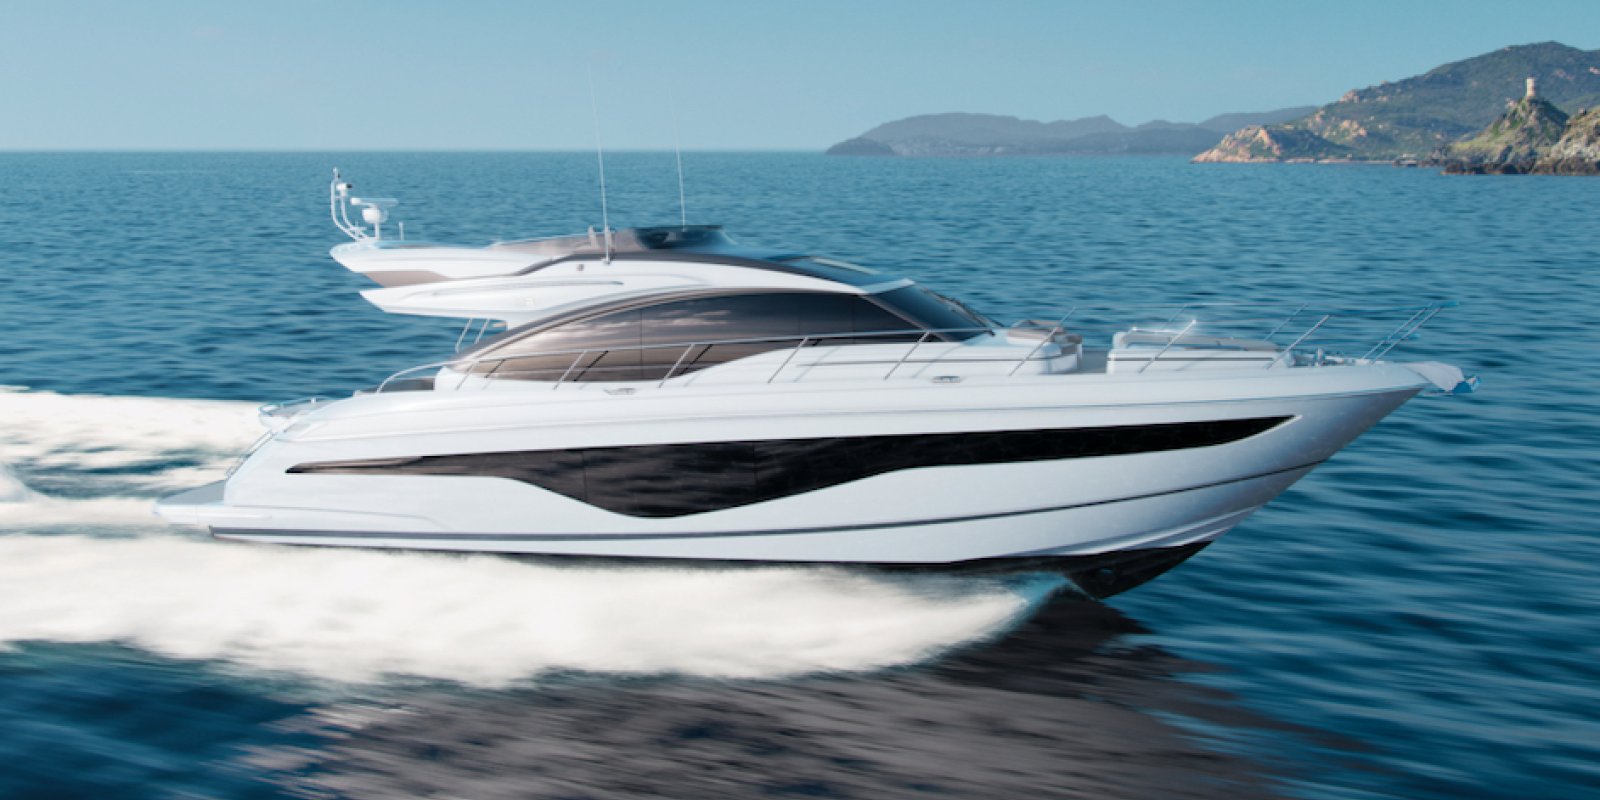 New Princess S62 exhibited at the Dusseldorf Boat Show 18-26 January